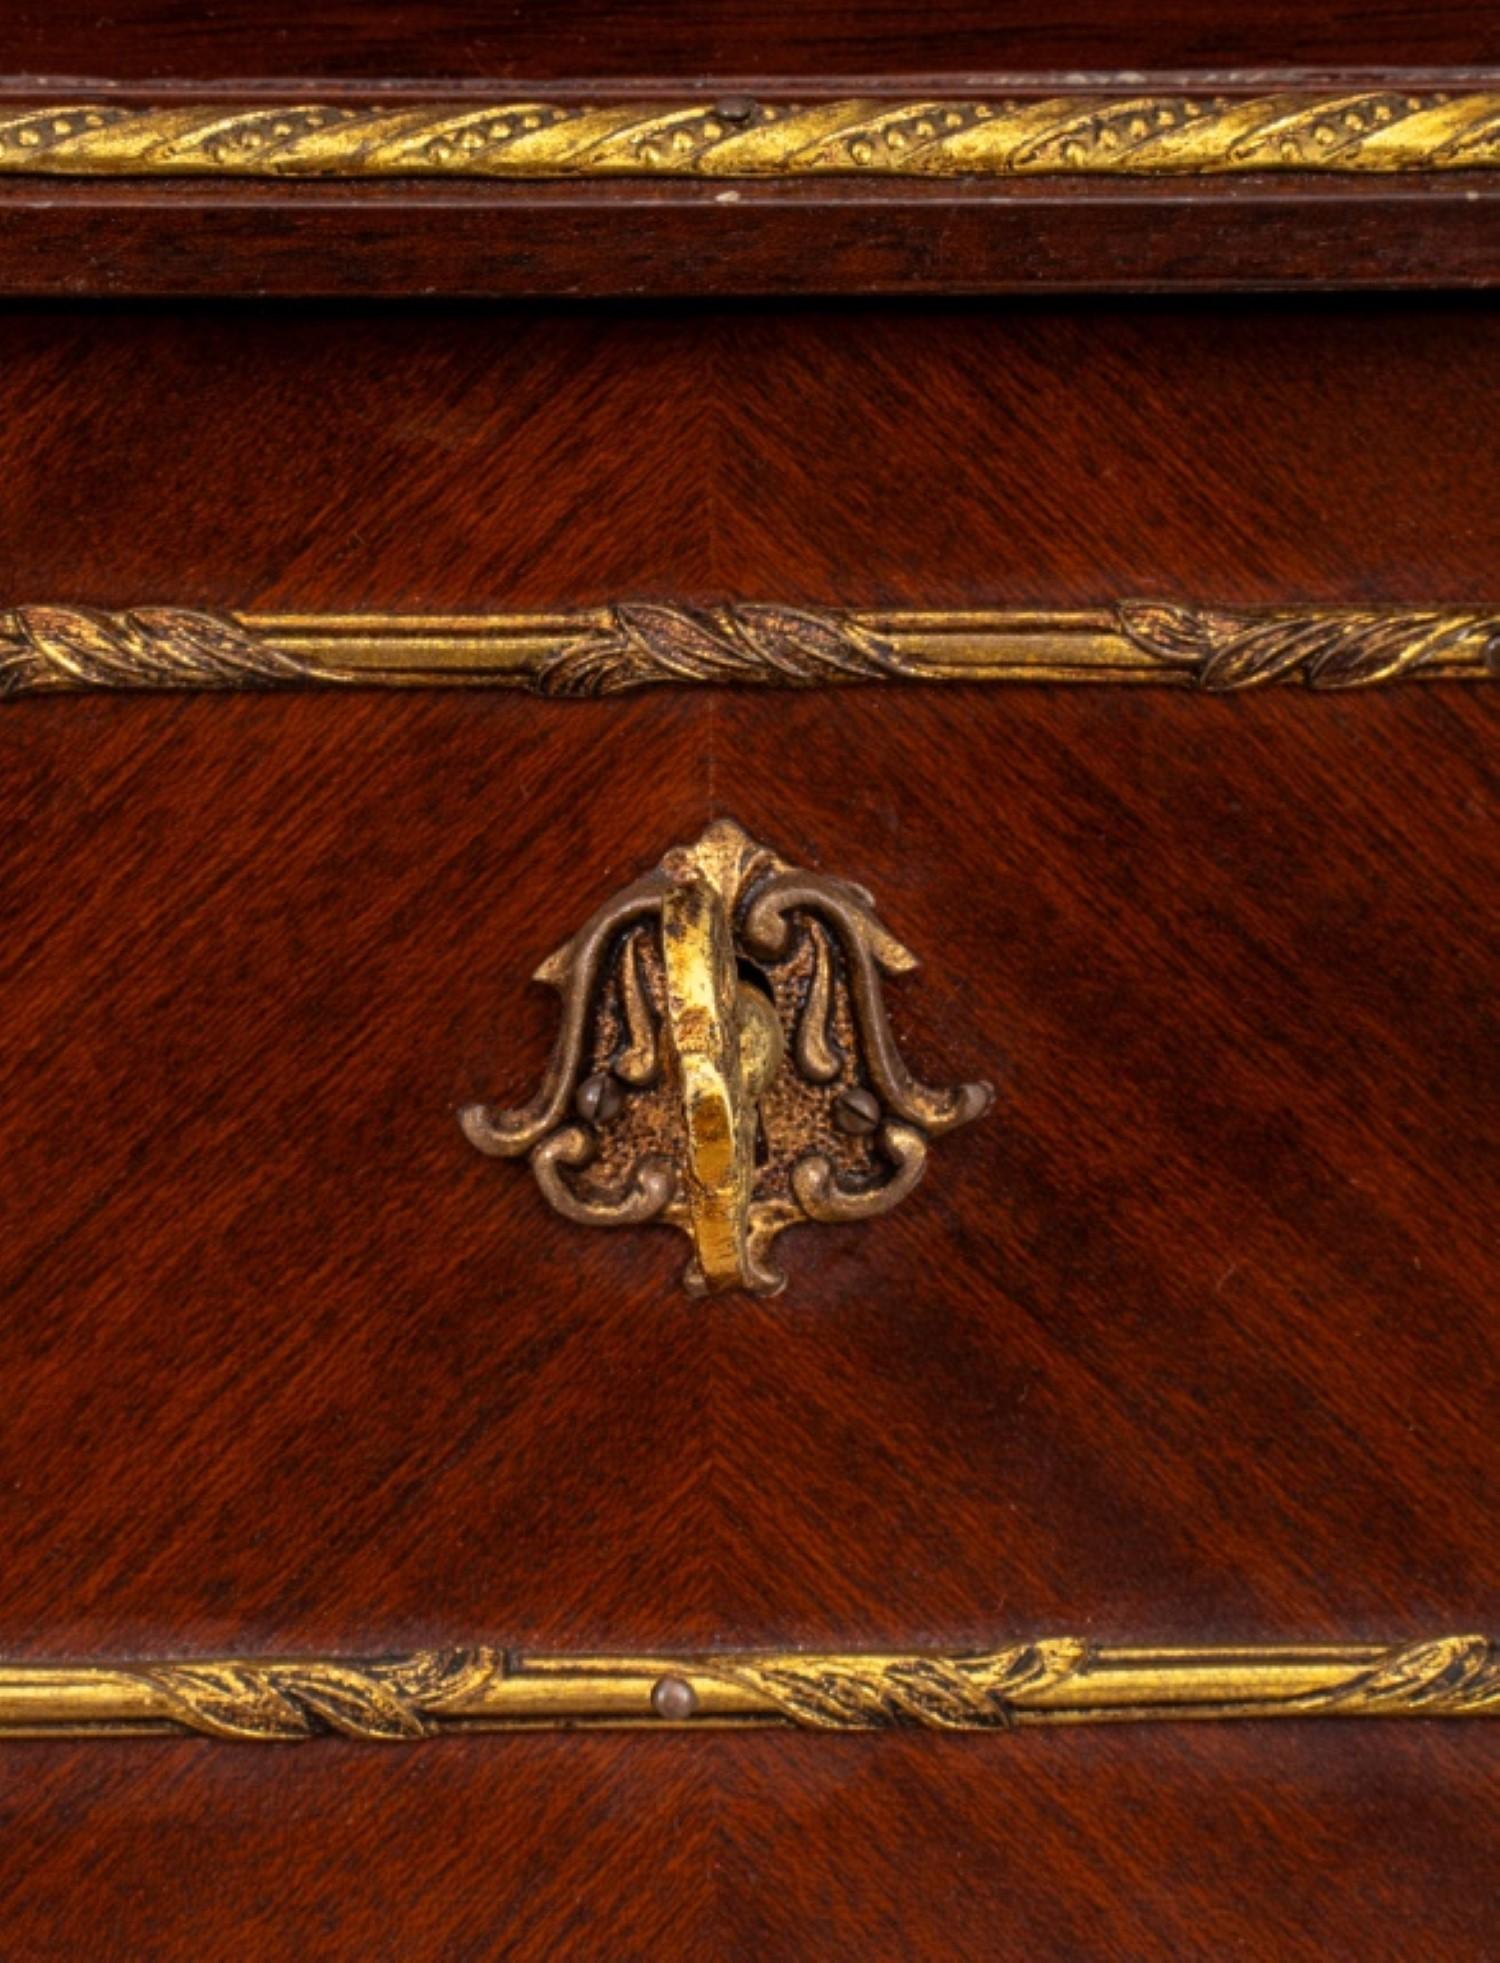 
The Napoleon III Style Louis XV Revival Lady's Desk has,

Dimensions of 39